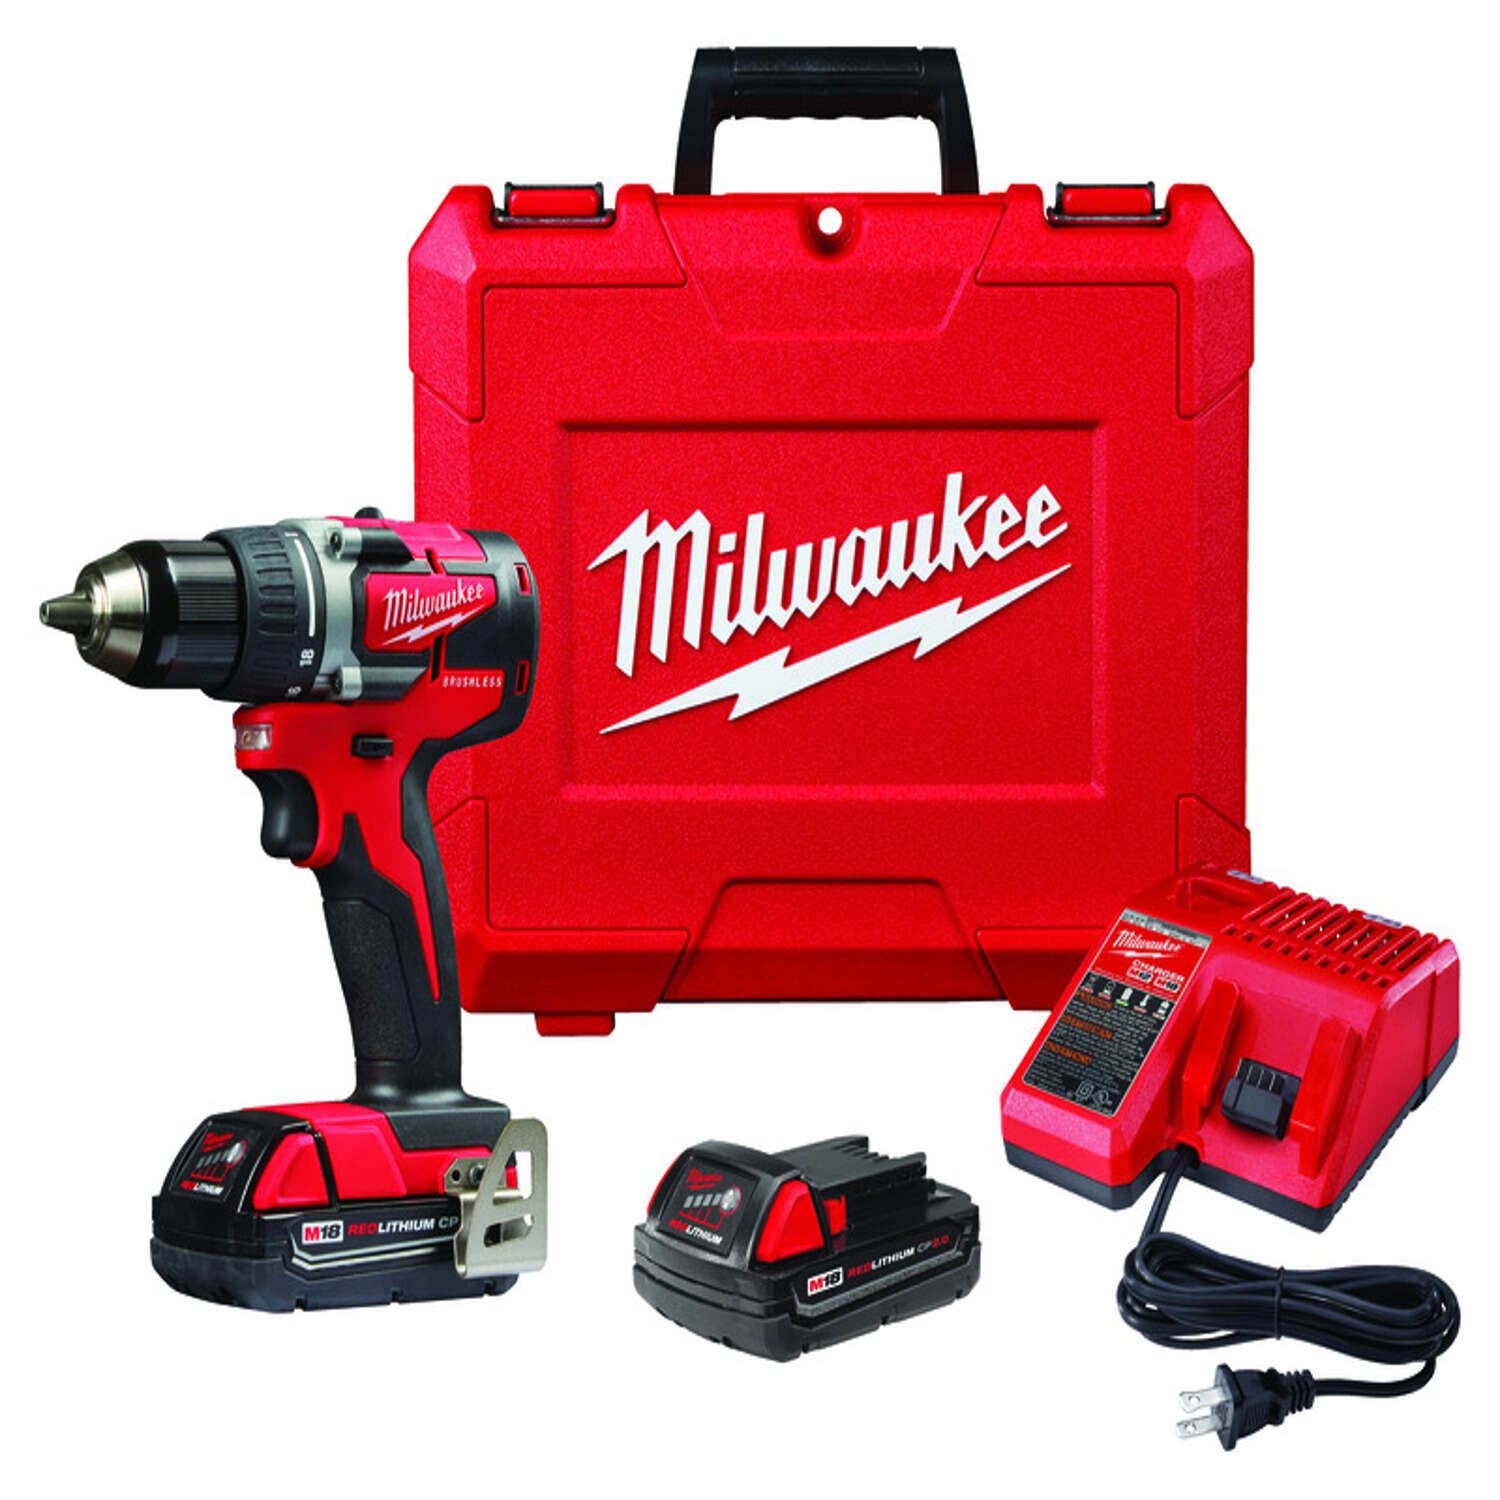 Milwaukee M18 18 V 1/2 in. Brushless Cordless Compact Drill Kit (Battery & Charger) on Sale At VigLink Optimize Merchants